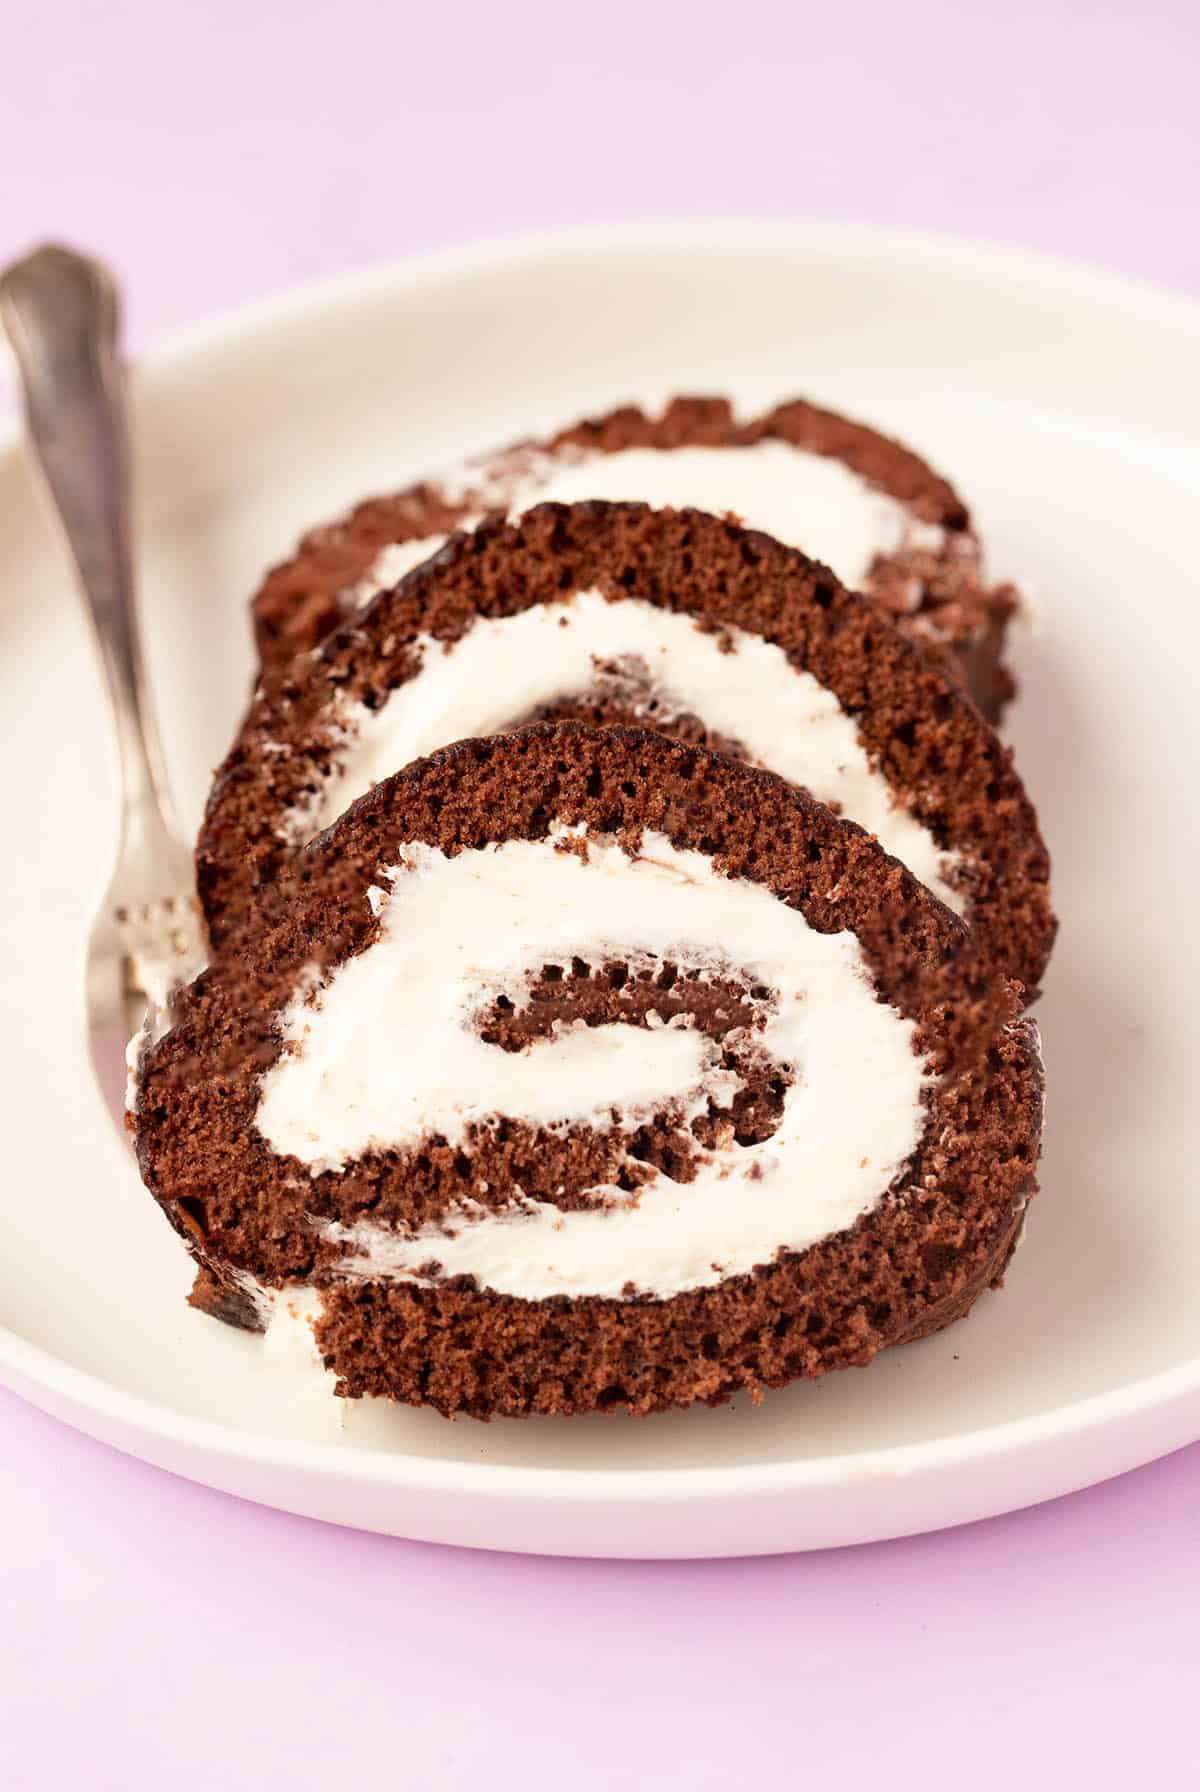 Slices of chocolate swiss roll sitting on a white plate with a small fork.